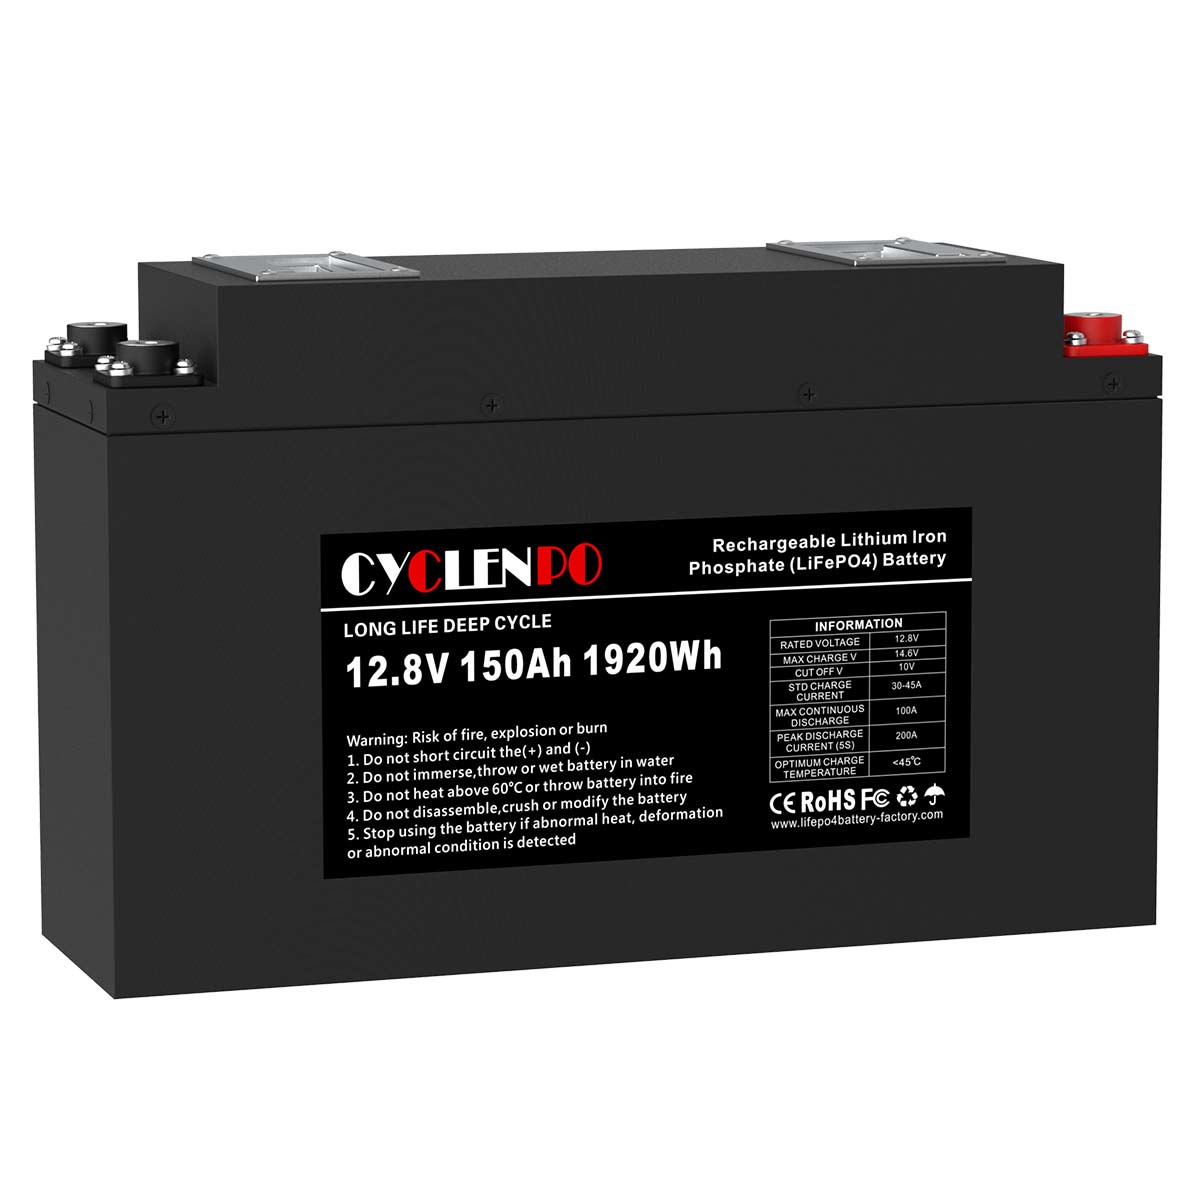 Cyclenpo deep cycle 12v 150ah lithium battery for vehicle